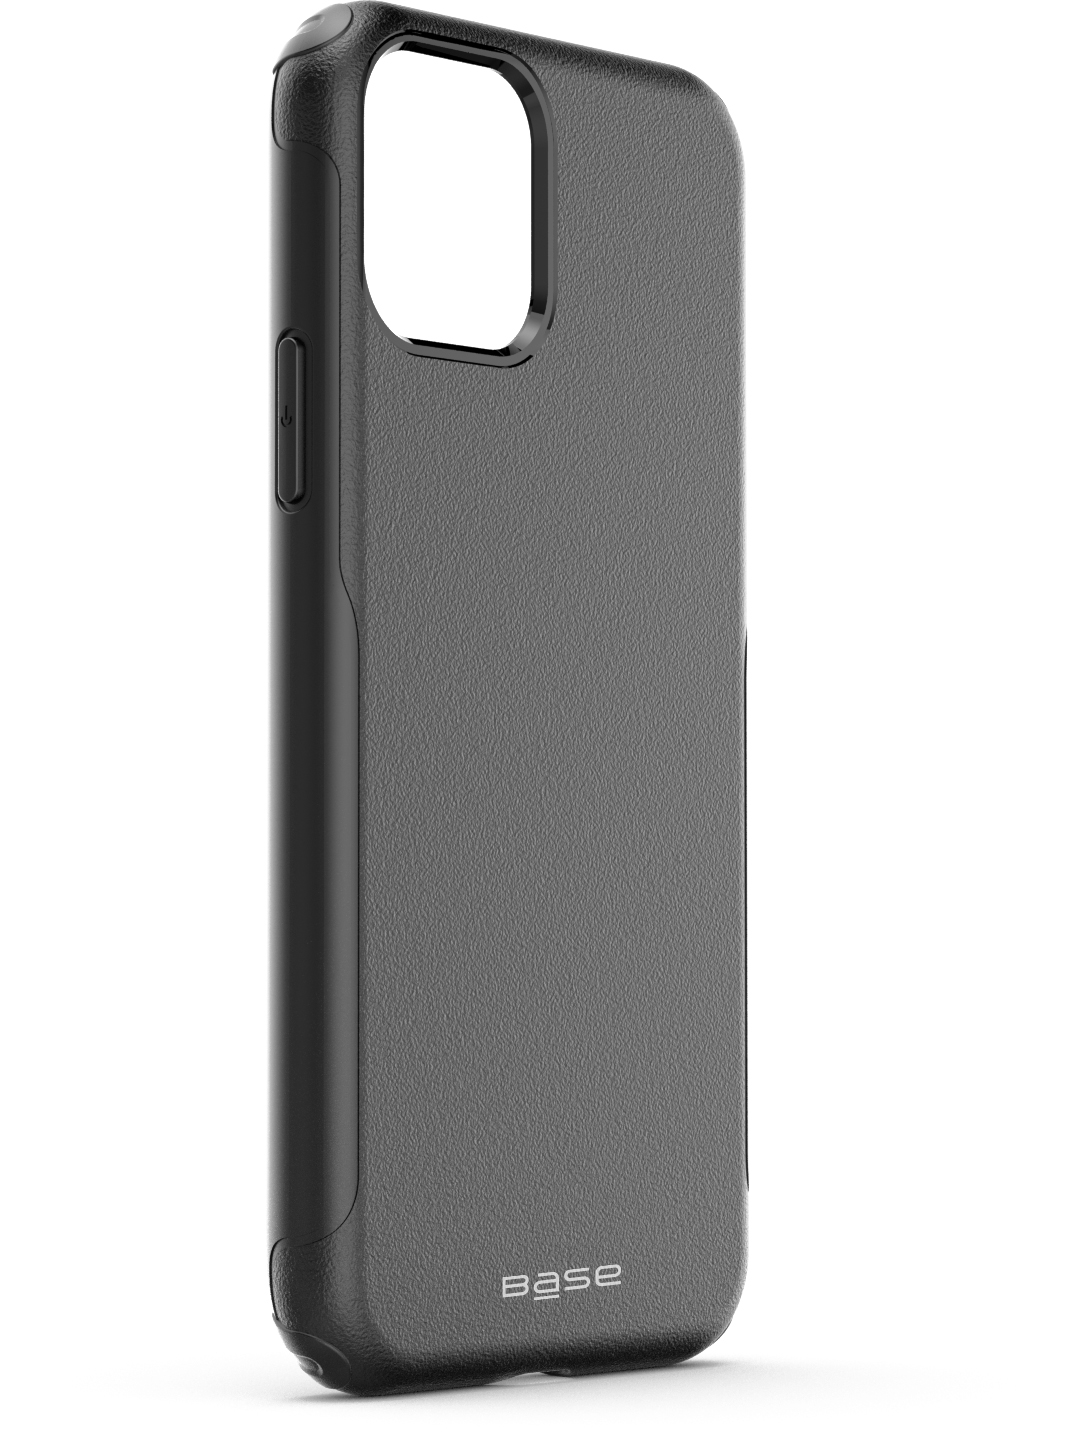 Base  IPhone 11 PRO (5.8) -ProTech - Rugged Armor Protective Case - Black